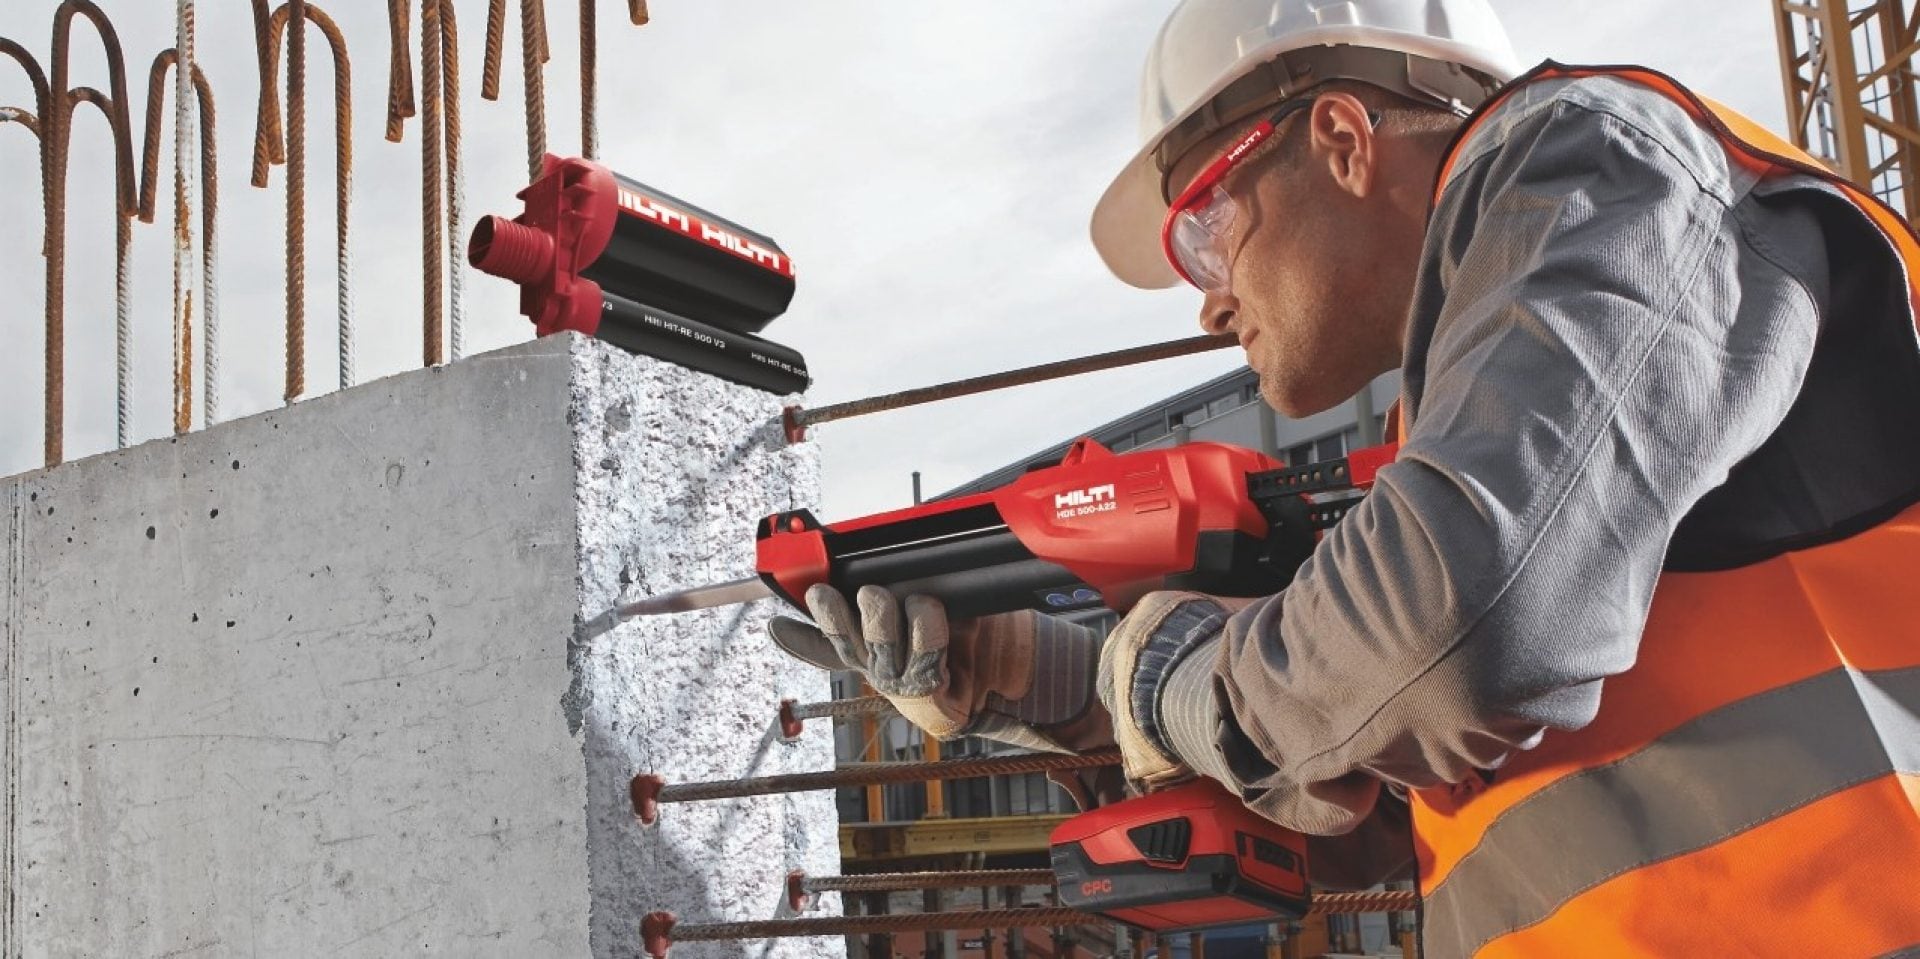 A worker installing a rebar into a concrete wall with a Hilti tool